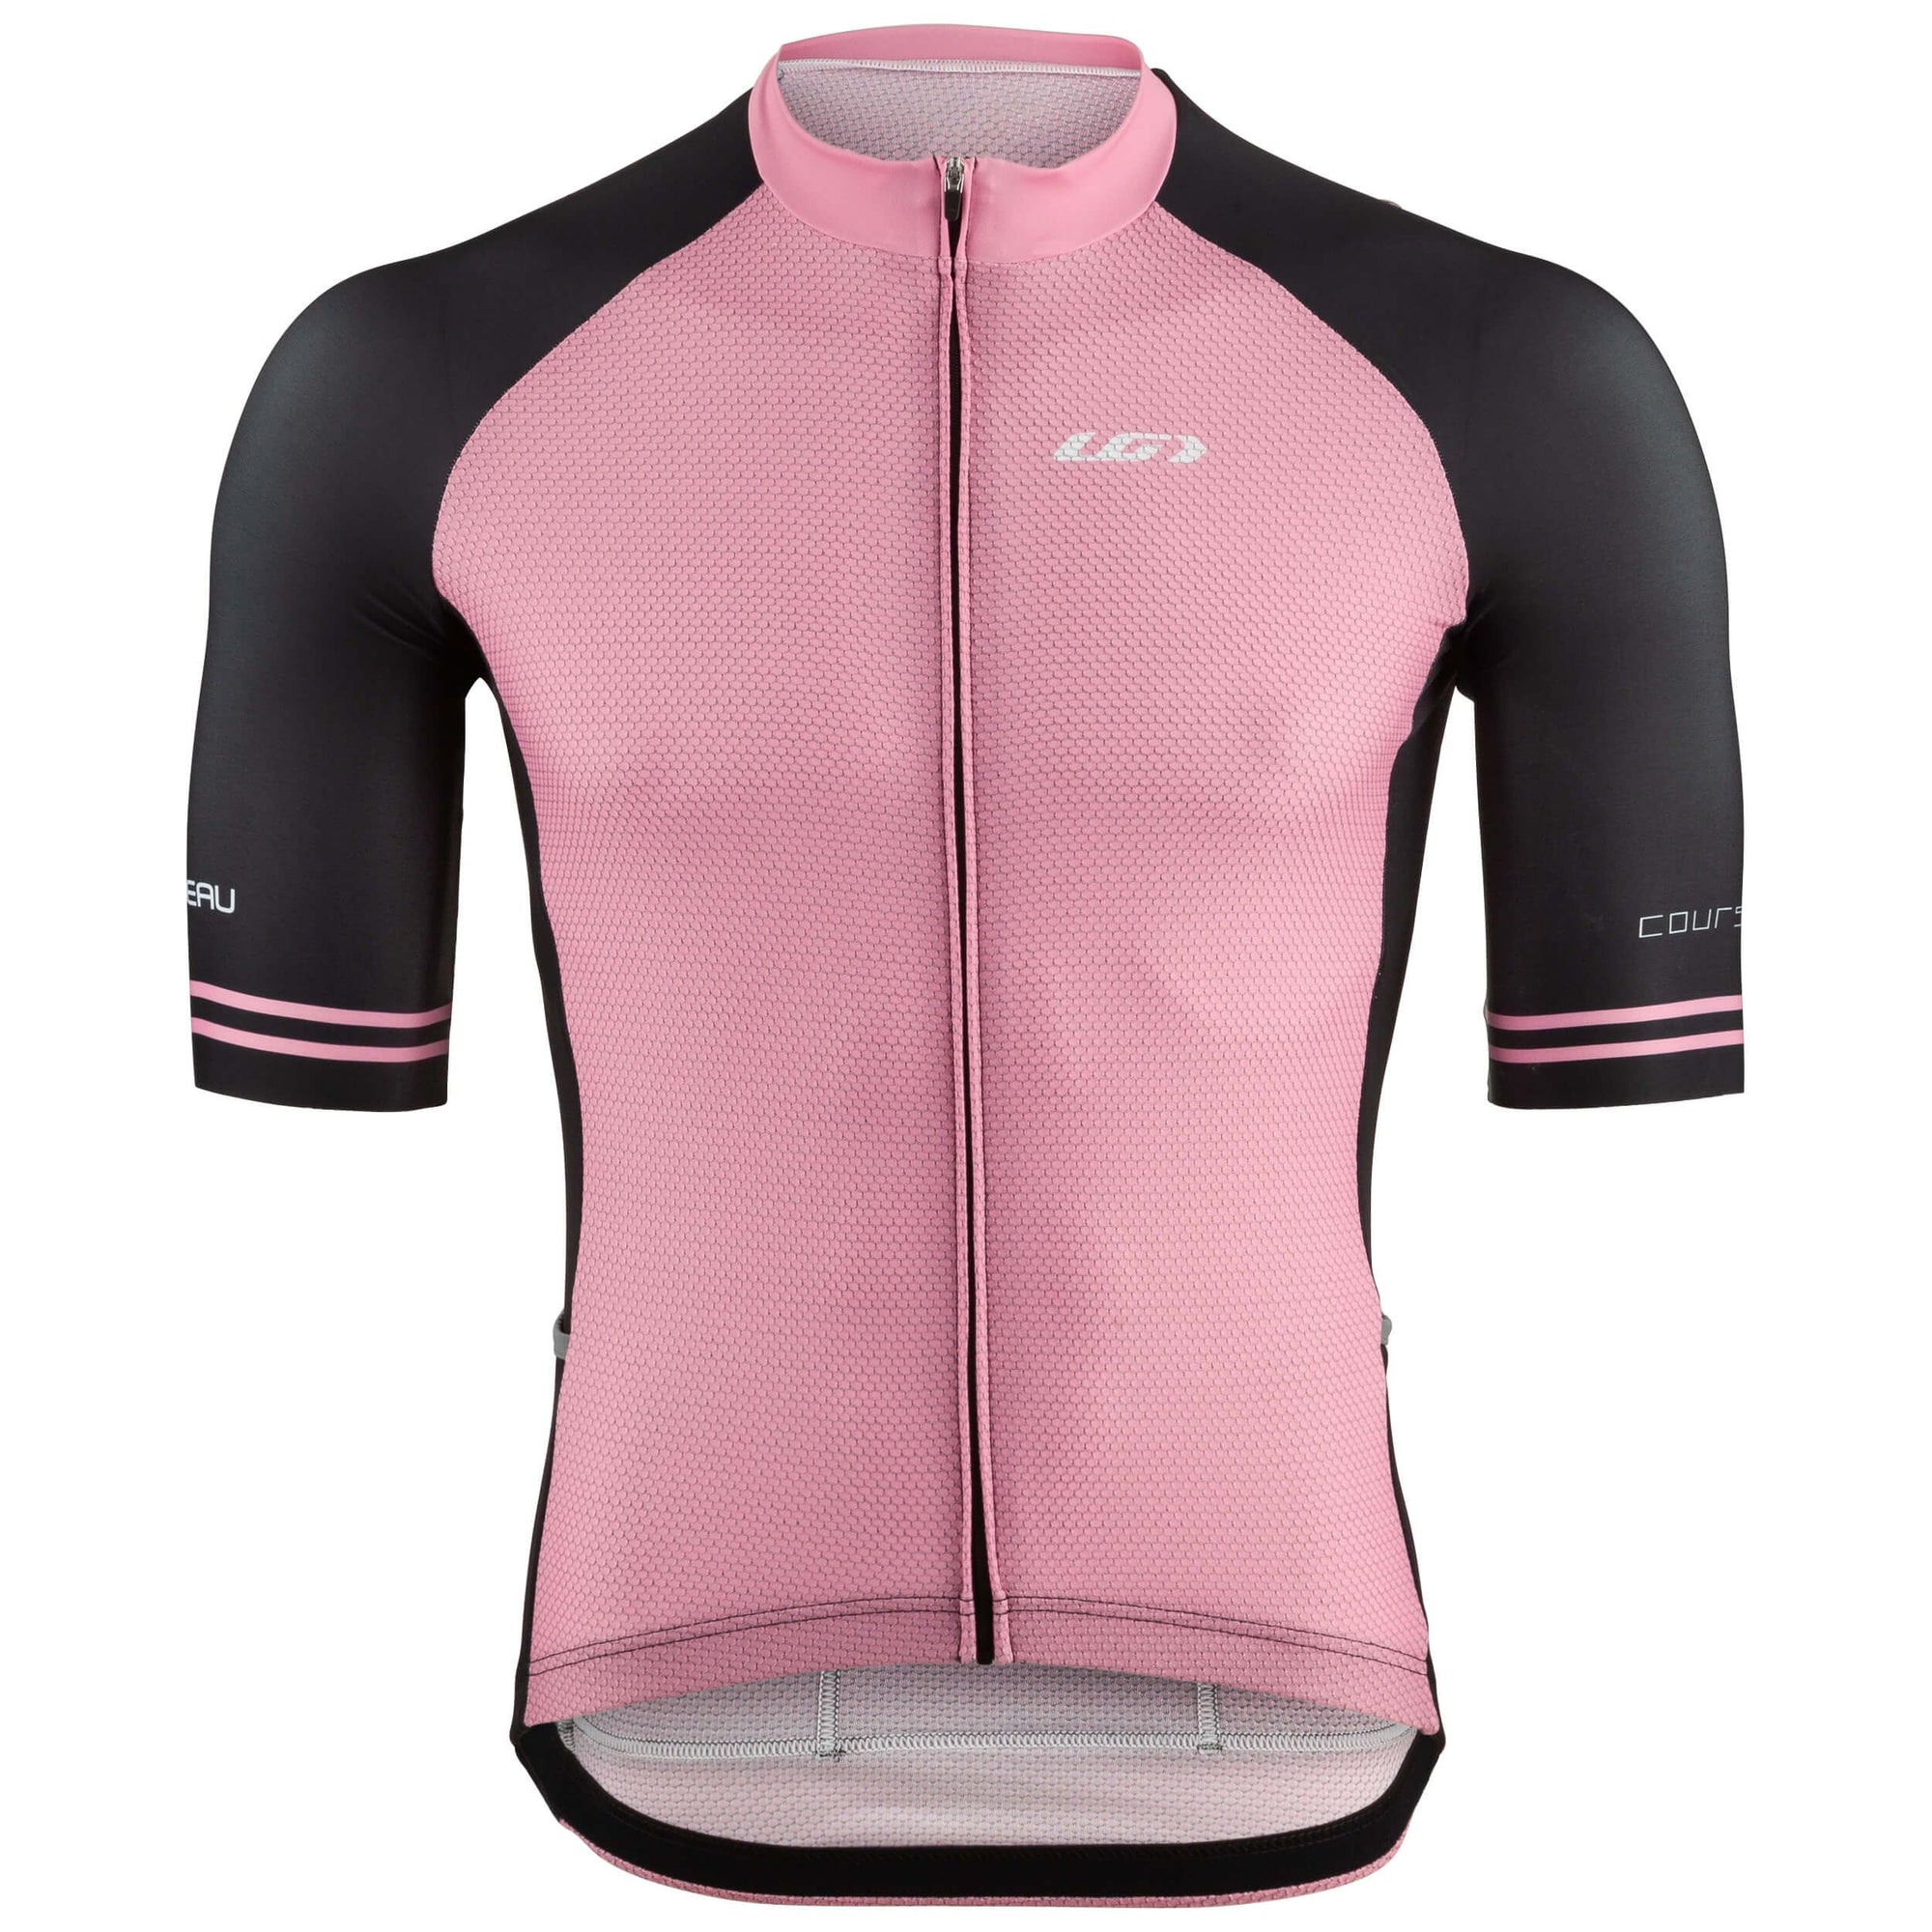 Course Air Jersey - Pale Pink, L